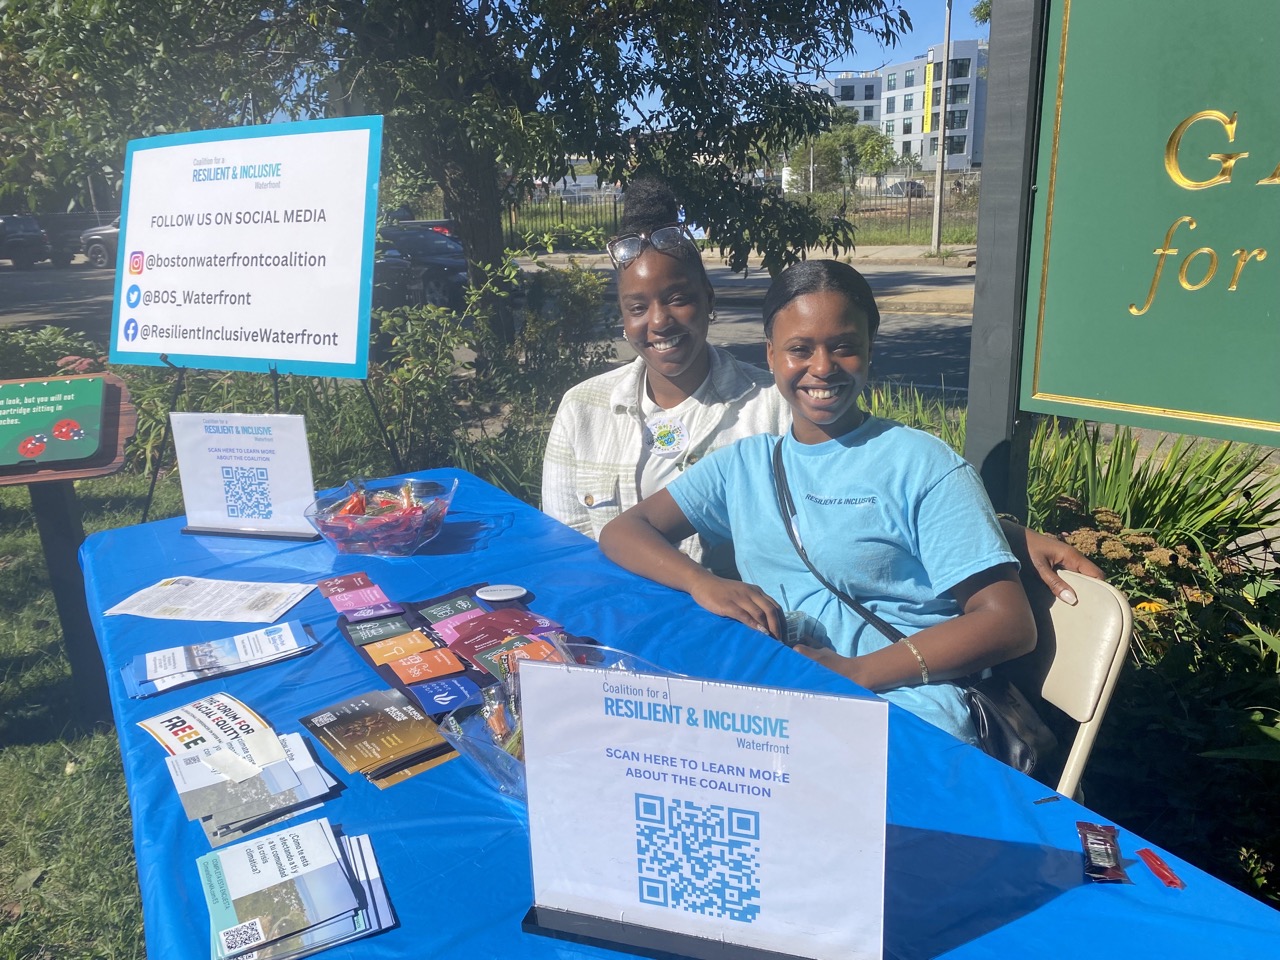 Errin Davis and Ajah Joseph from the Coalition for a Resilient and
      Inclusive waterfront were on hand to share information about efforts to preserve and open up Boston’s waterfront.